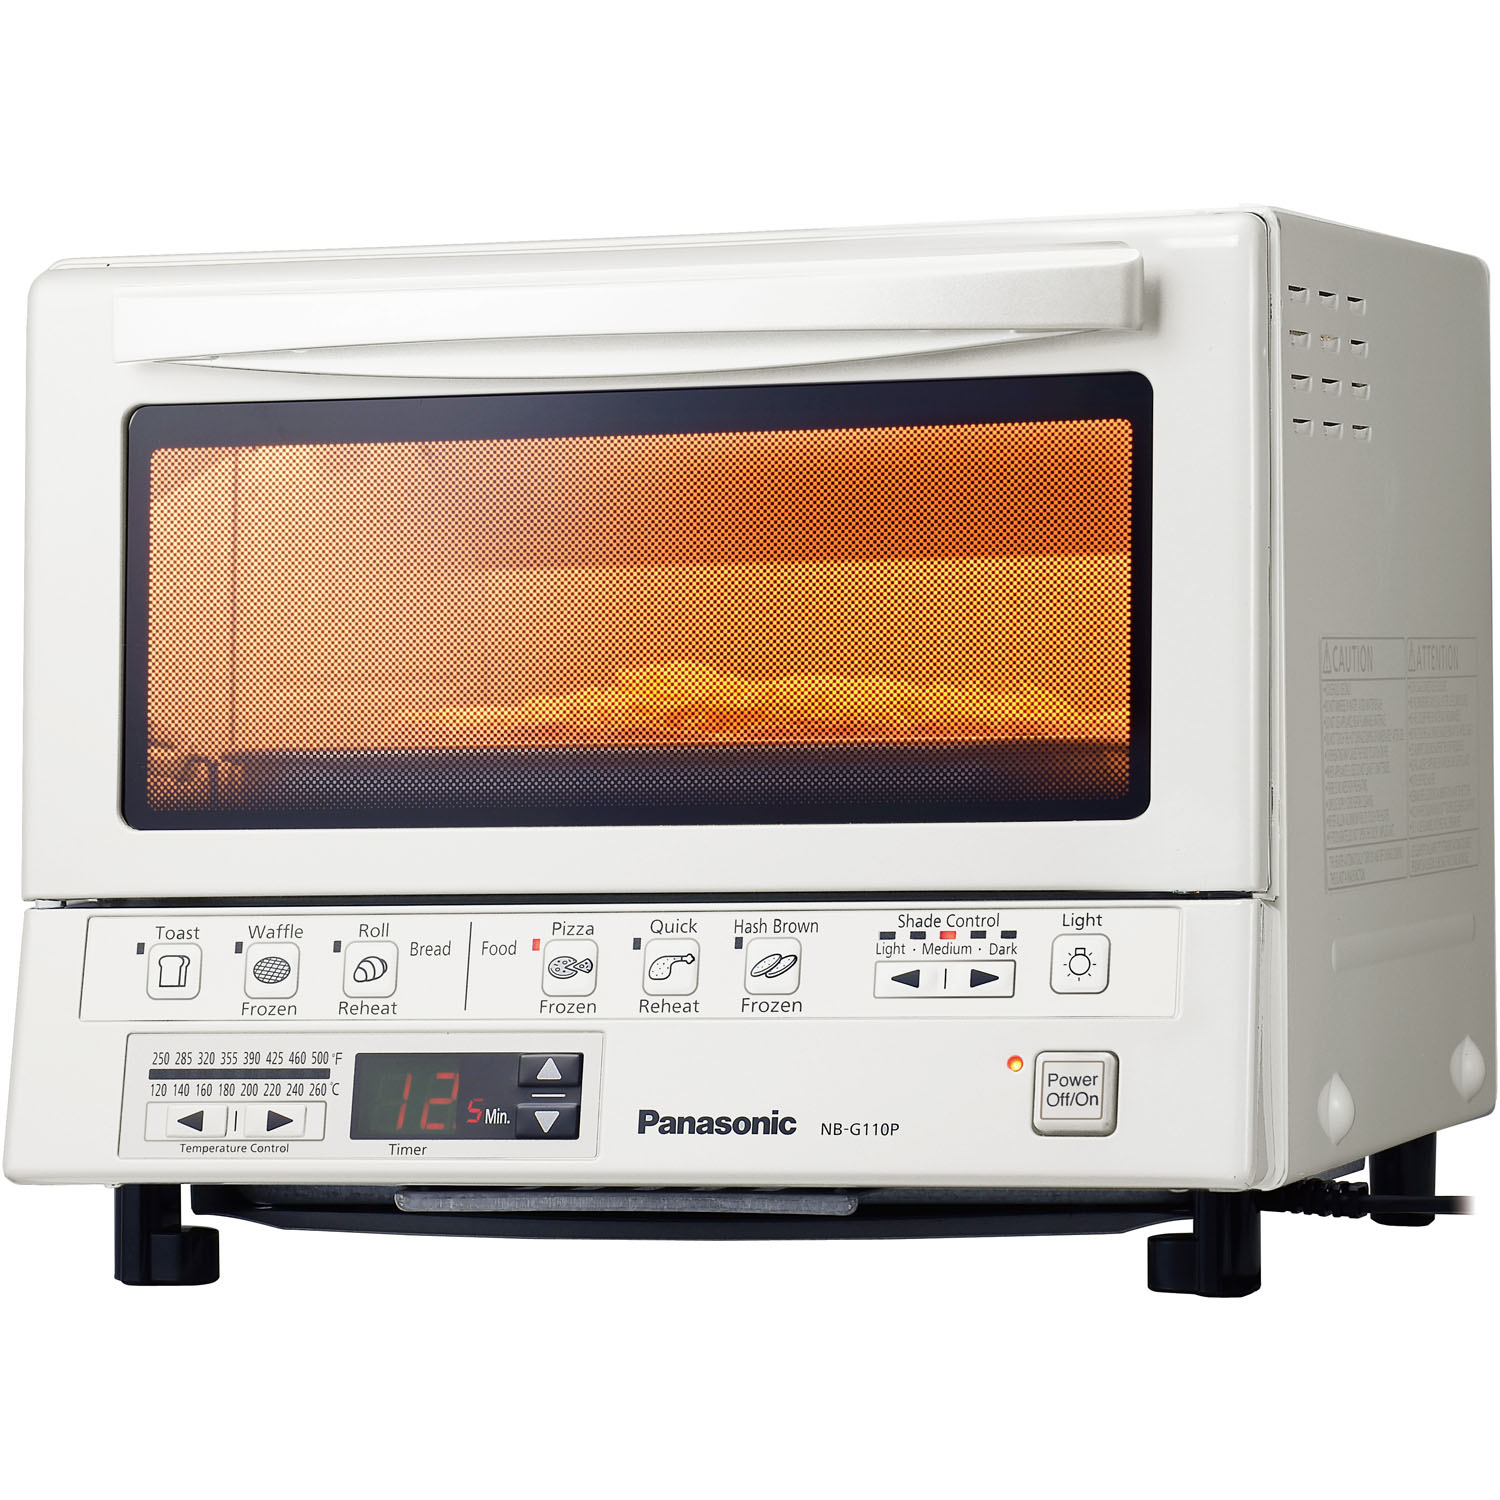 Toaster Oven - White - image 4 of 5